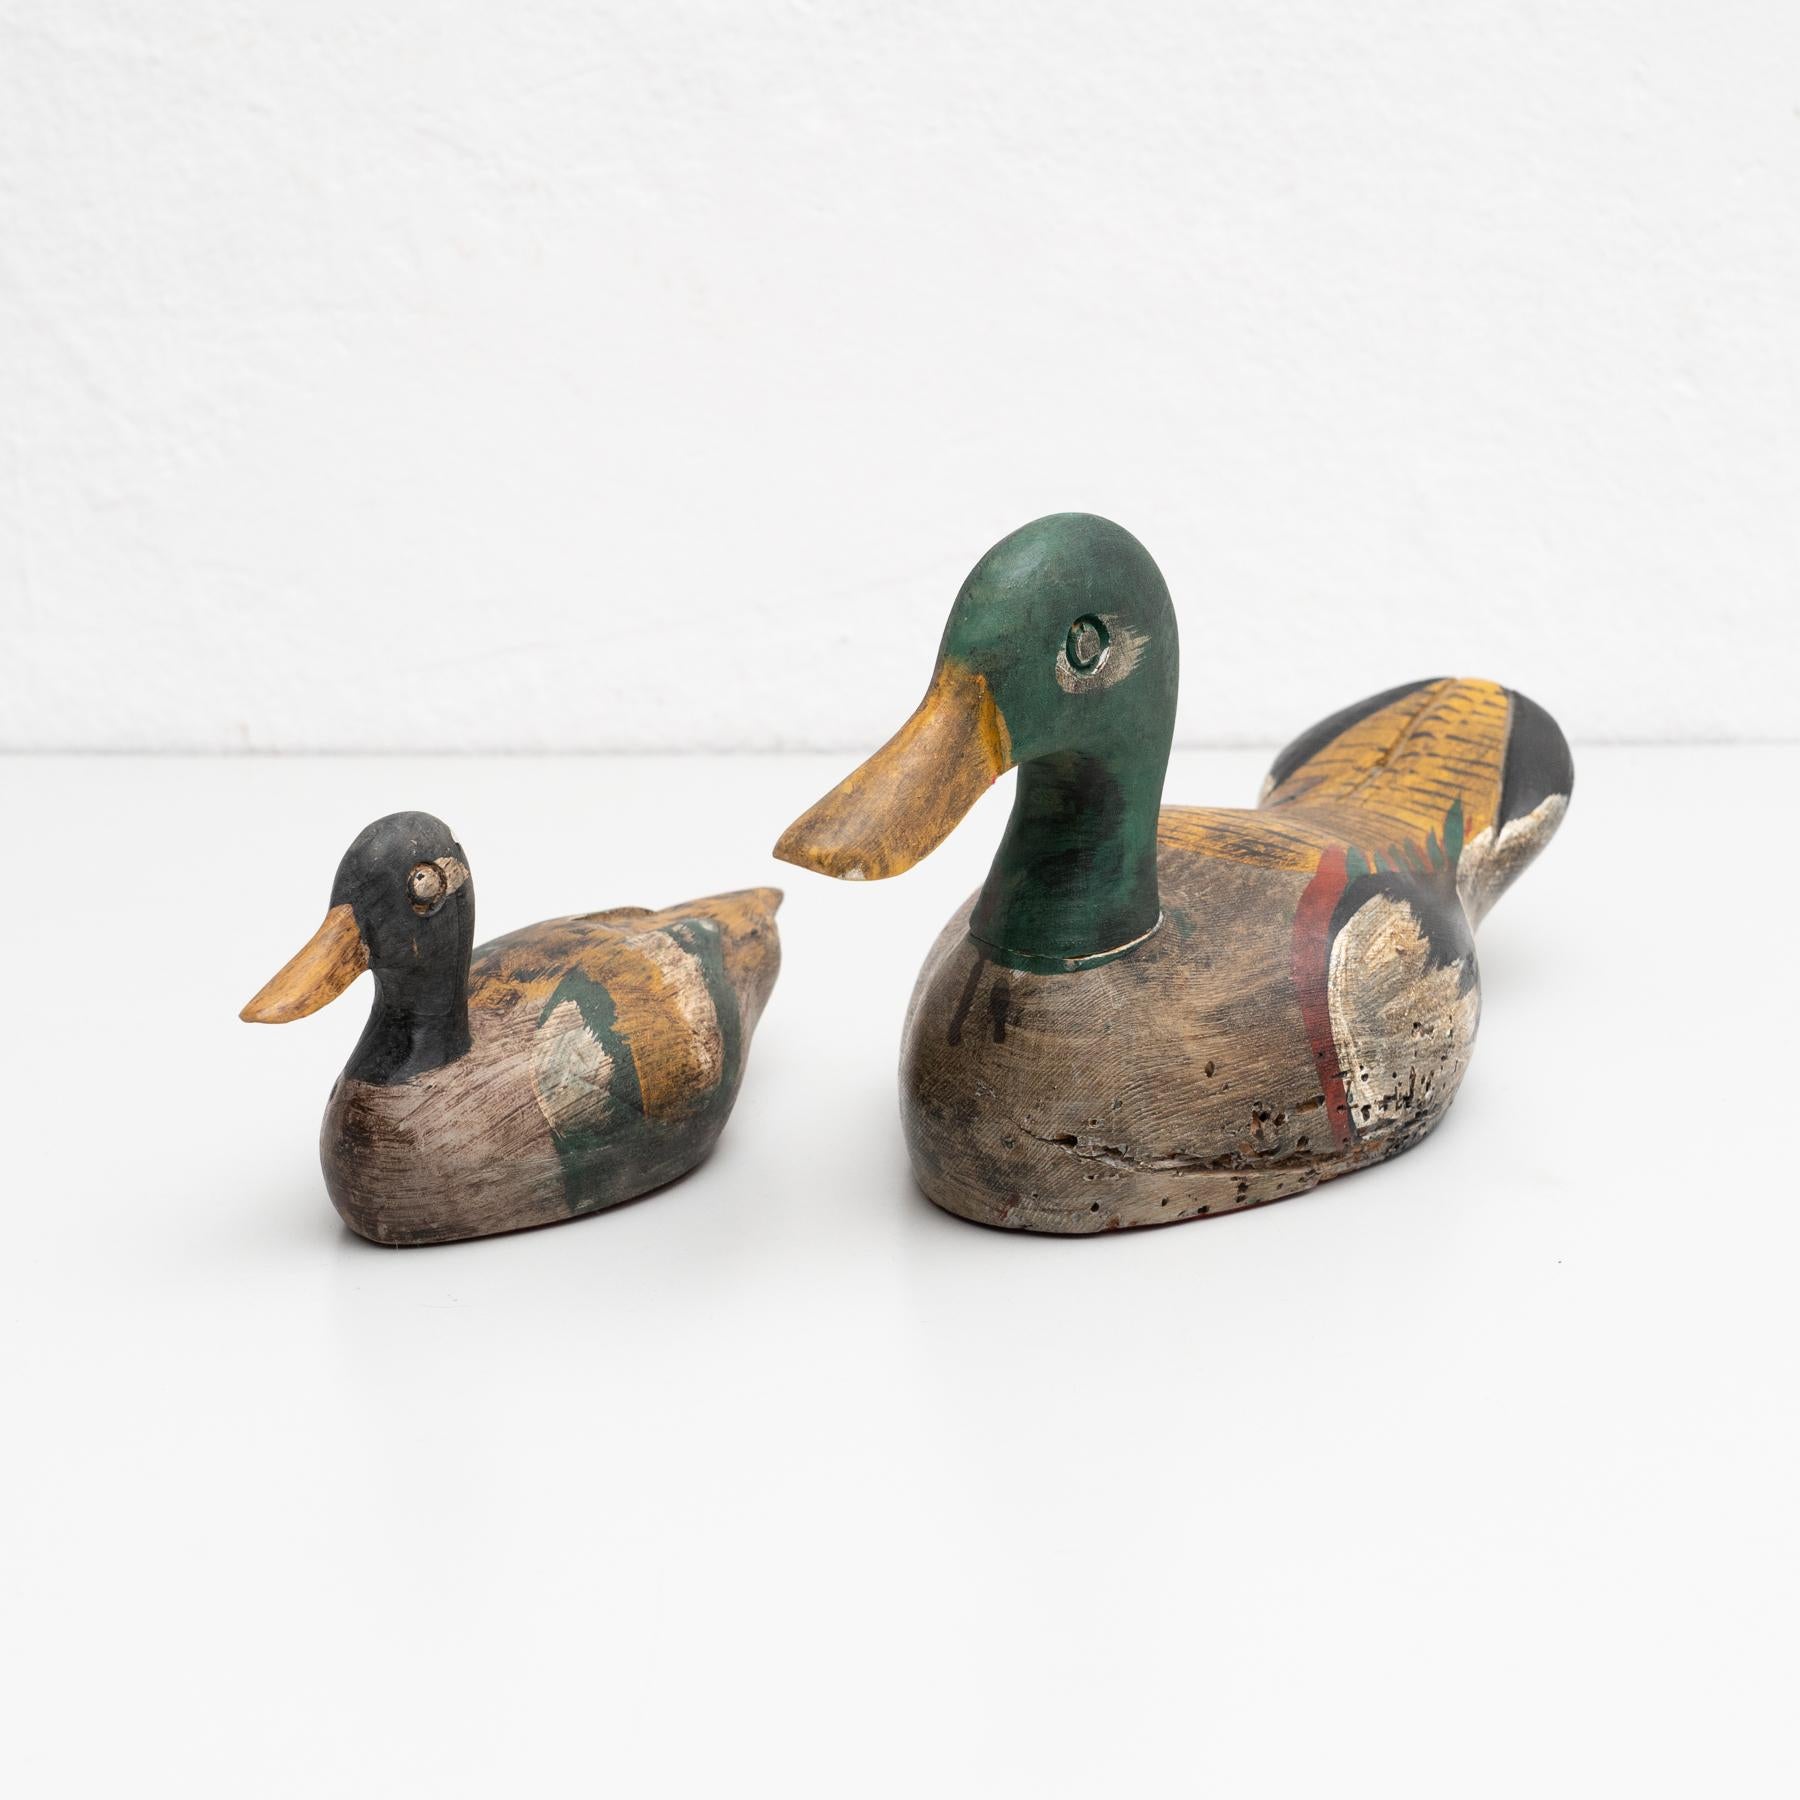 Set of two hand-painted antique figures of two ducks made of wood.

Made by unknown manufacturer in Barcelona, Spain, circa 1950.

In original condition, with minor wear consistent with age and use, preserving a beautiful